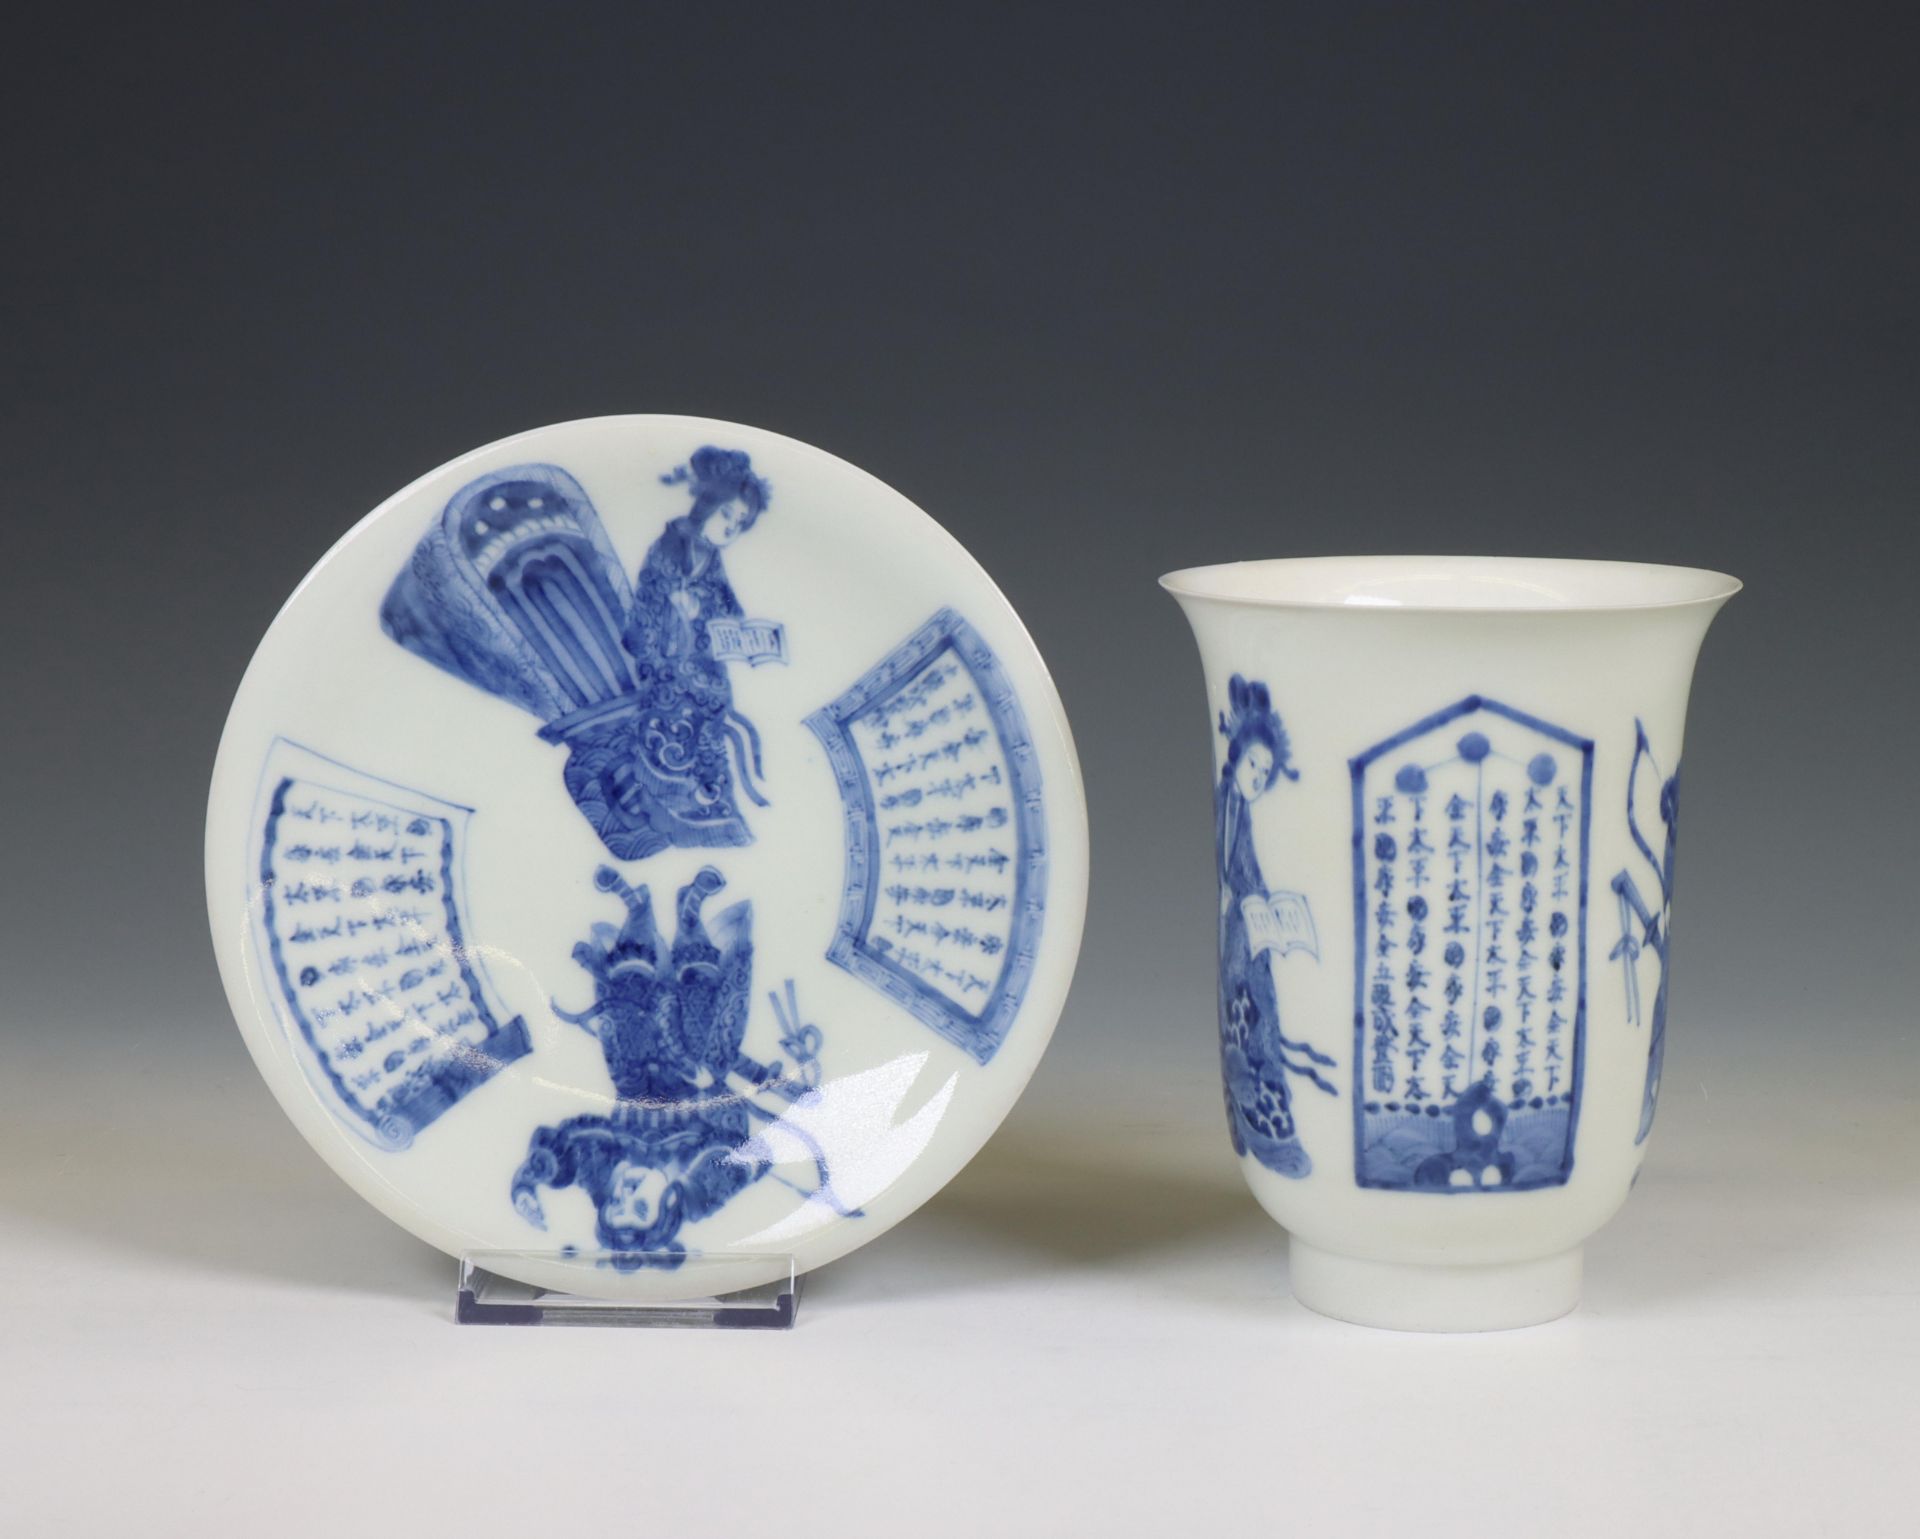 Japan, large blue and white porcelain 'Wu Shuang Pu' cup and saucer, 19th century, - Image 3 of 3